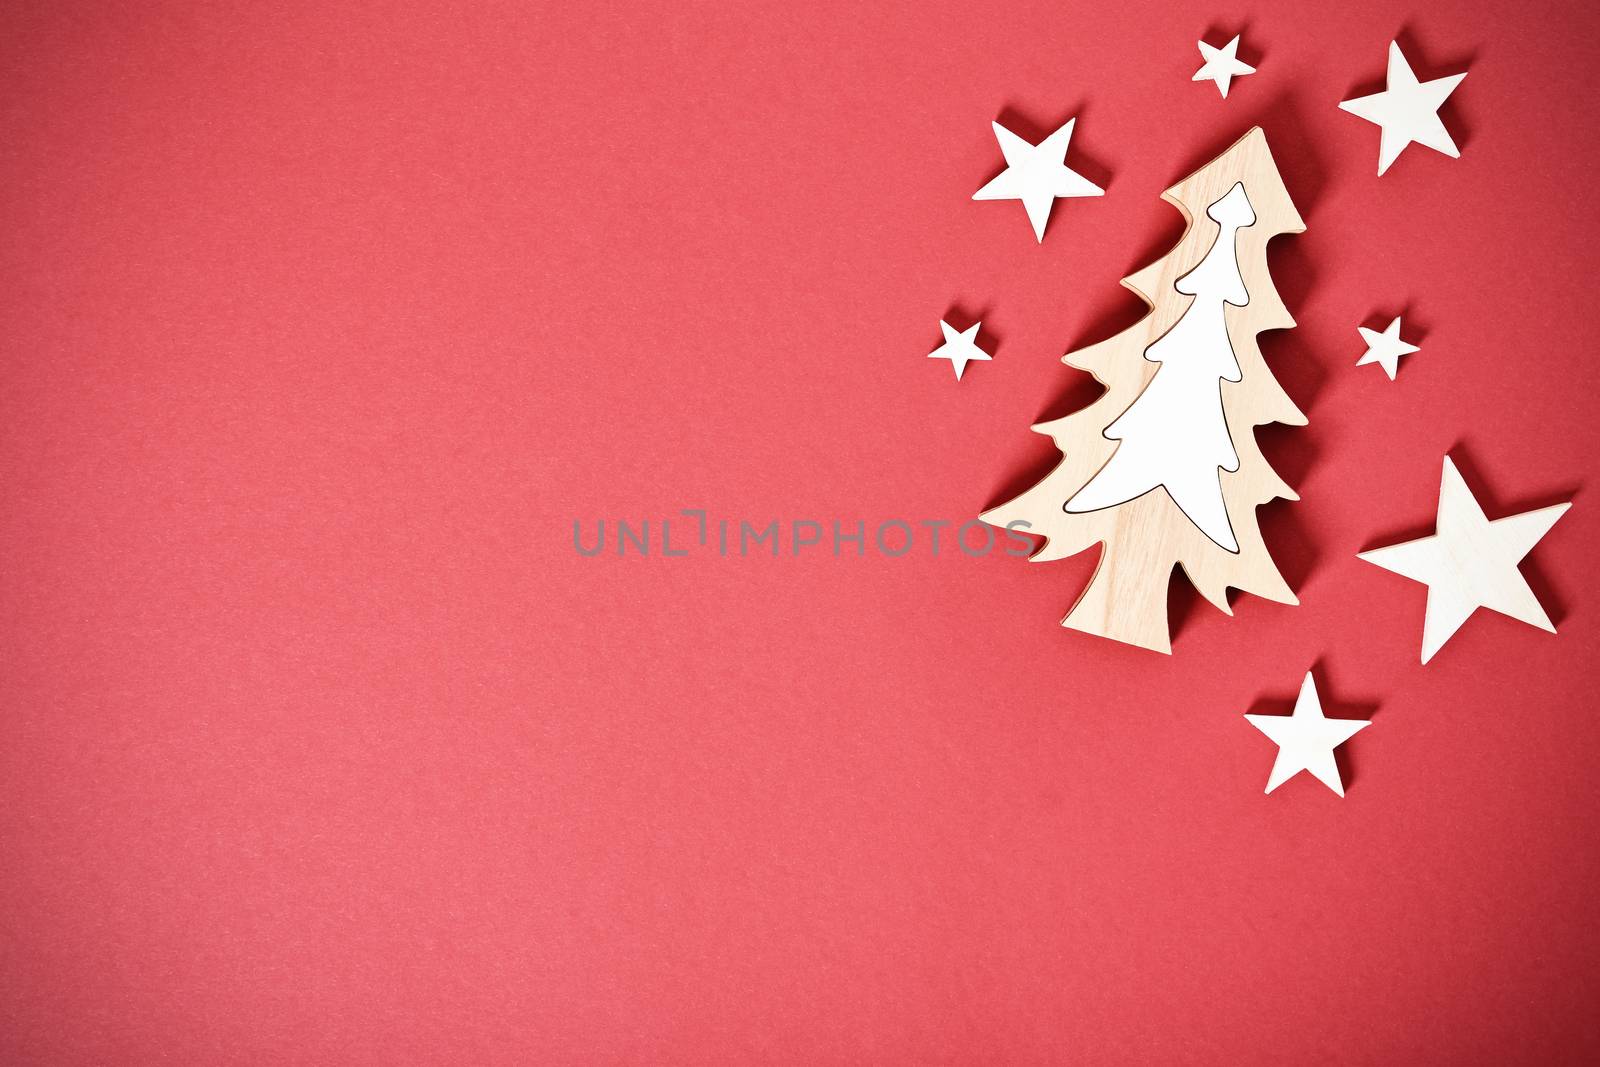 Seasonal greeting card concept with Christmas tree and stars by Mendelex